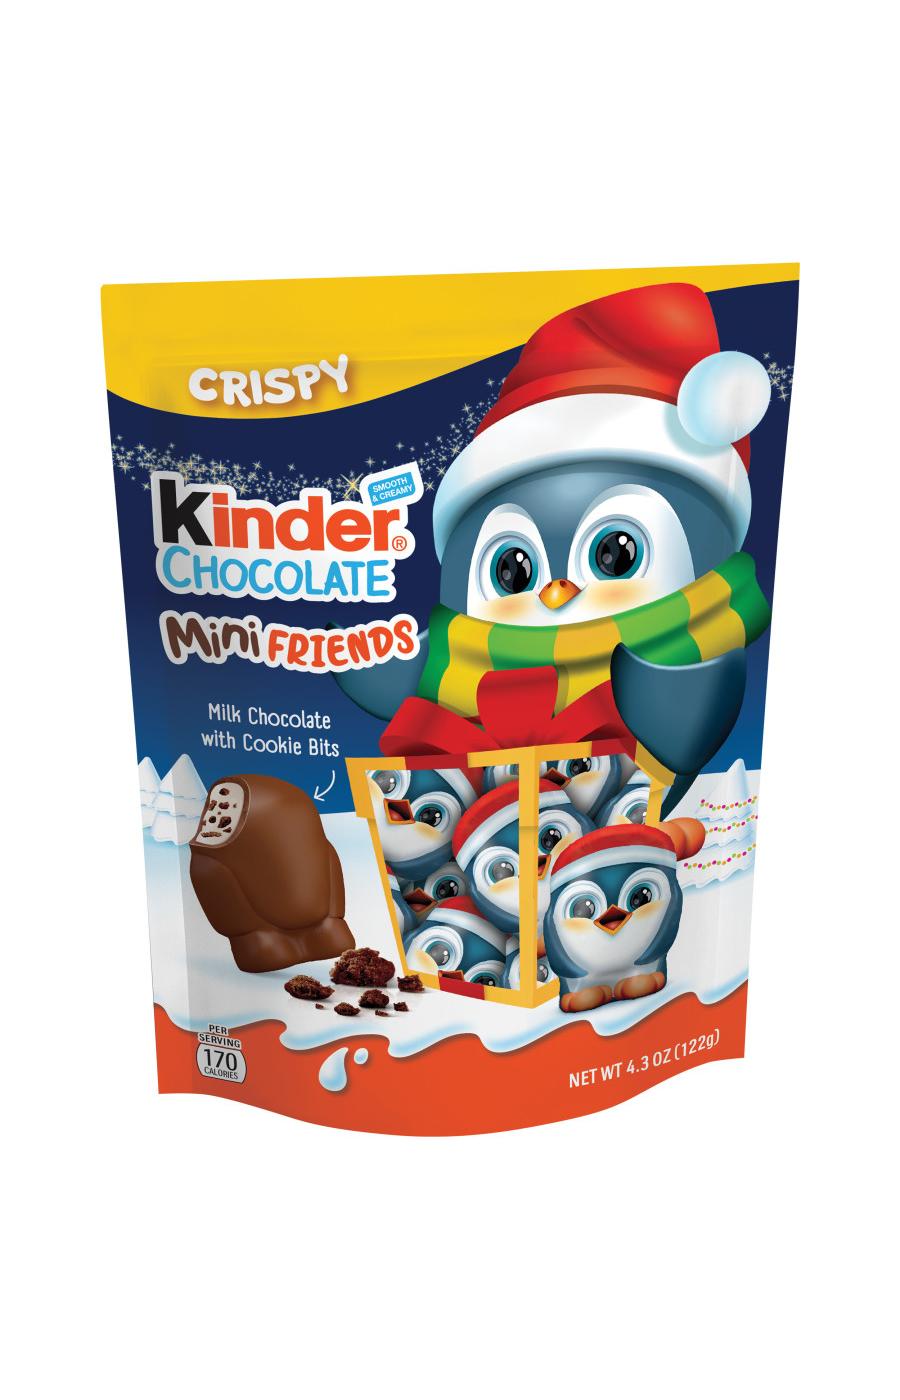 Kinder Mini Friends Milk Chocolate with Cookie Bits; image 1 of 2